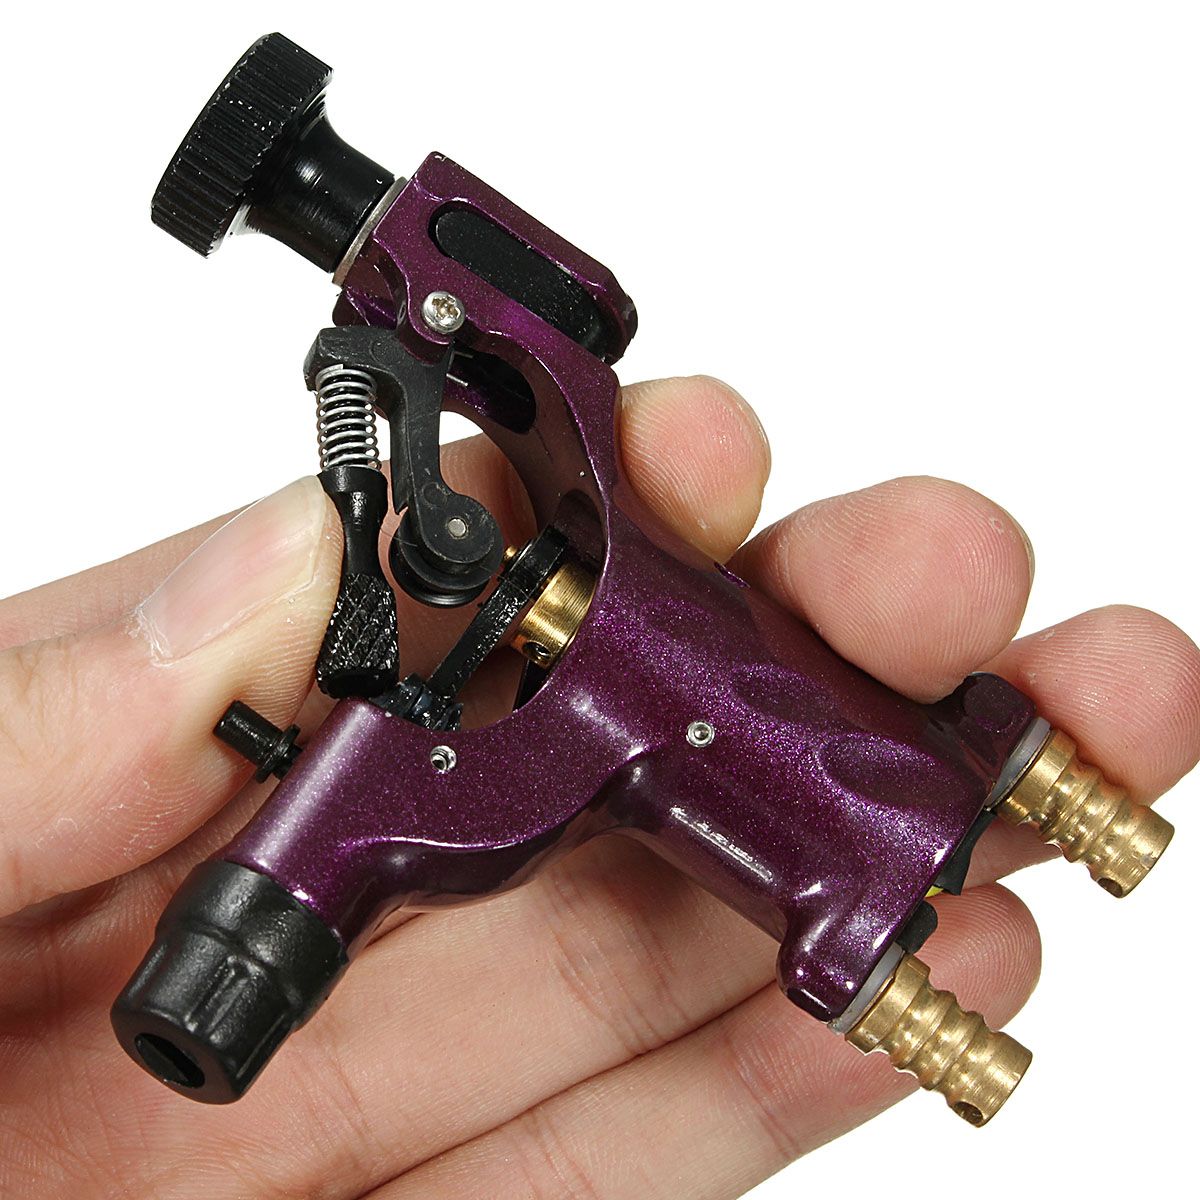 Purple Silent Rotary Motor Tattoo Dragonfly Machine Kit Set for Liner Shader